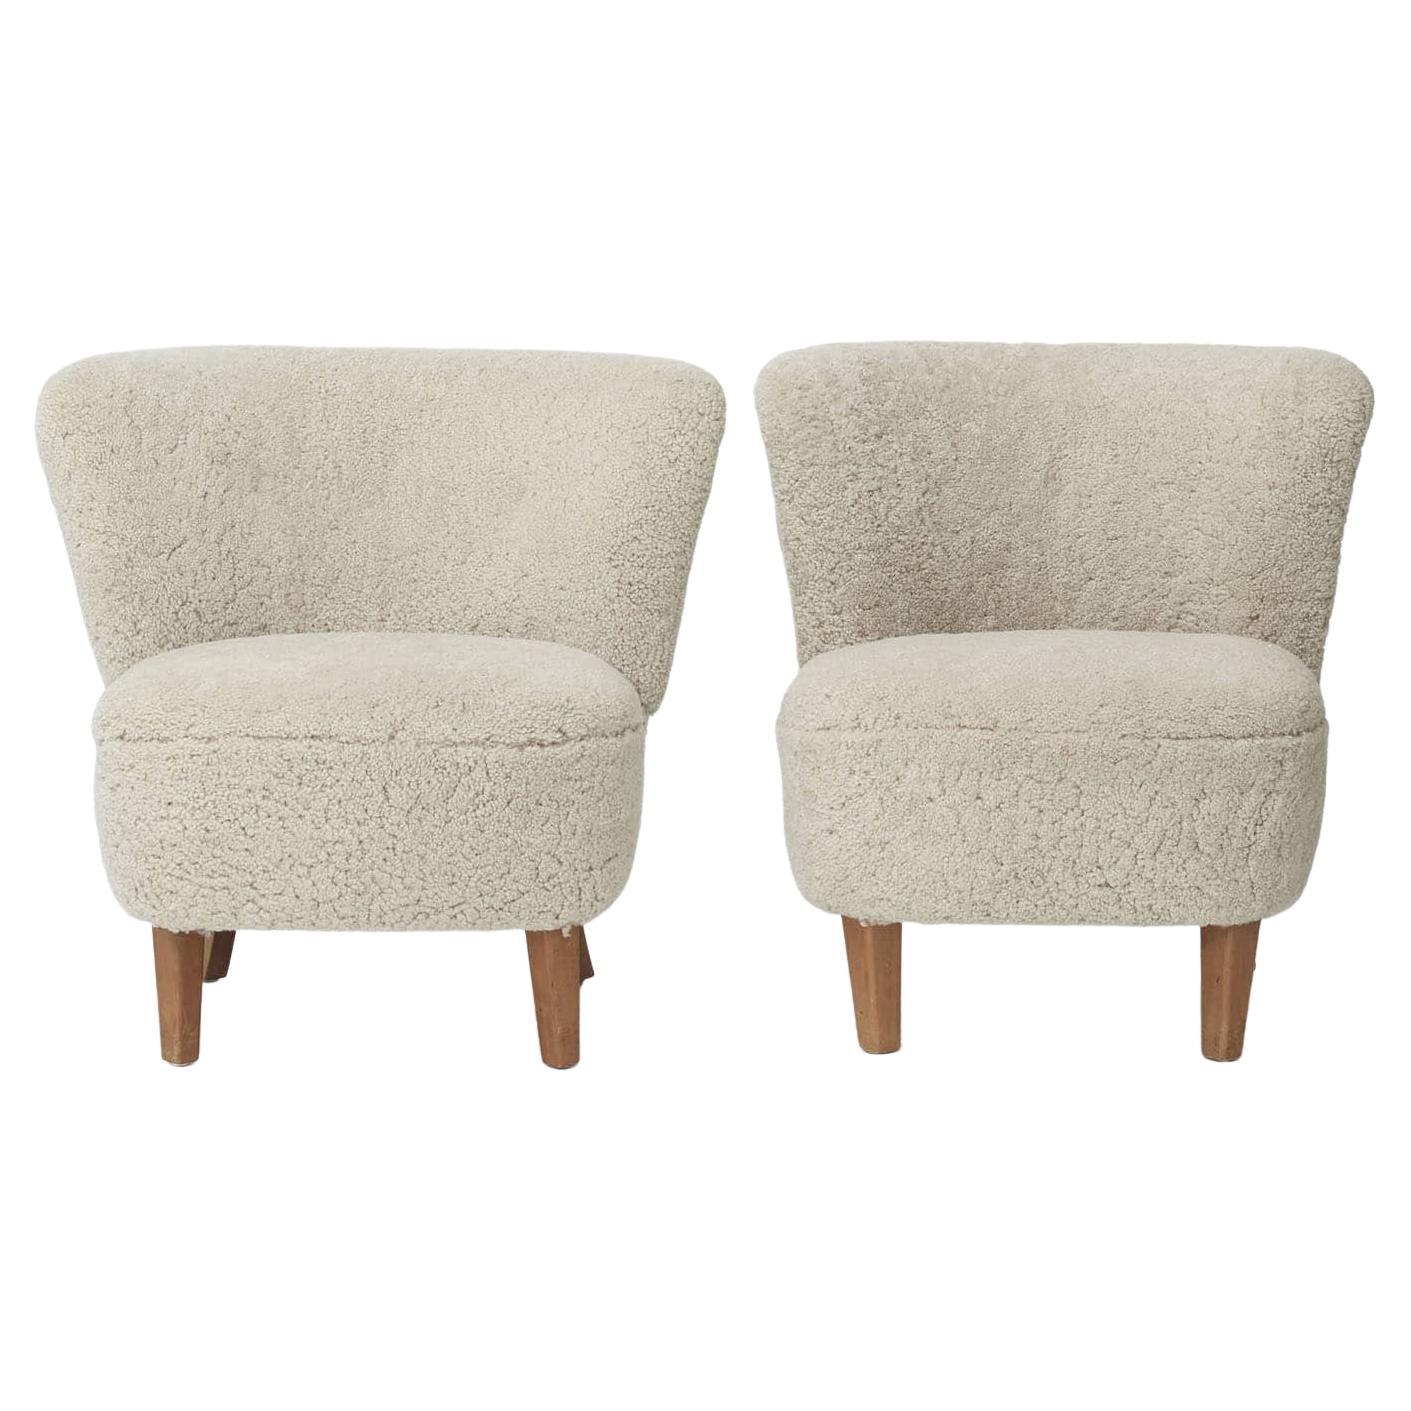 Pair of Lounge / Easy Chairs with Lambskin, Danish Design, 1940-1950 For Sale